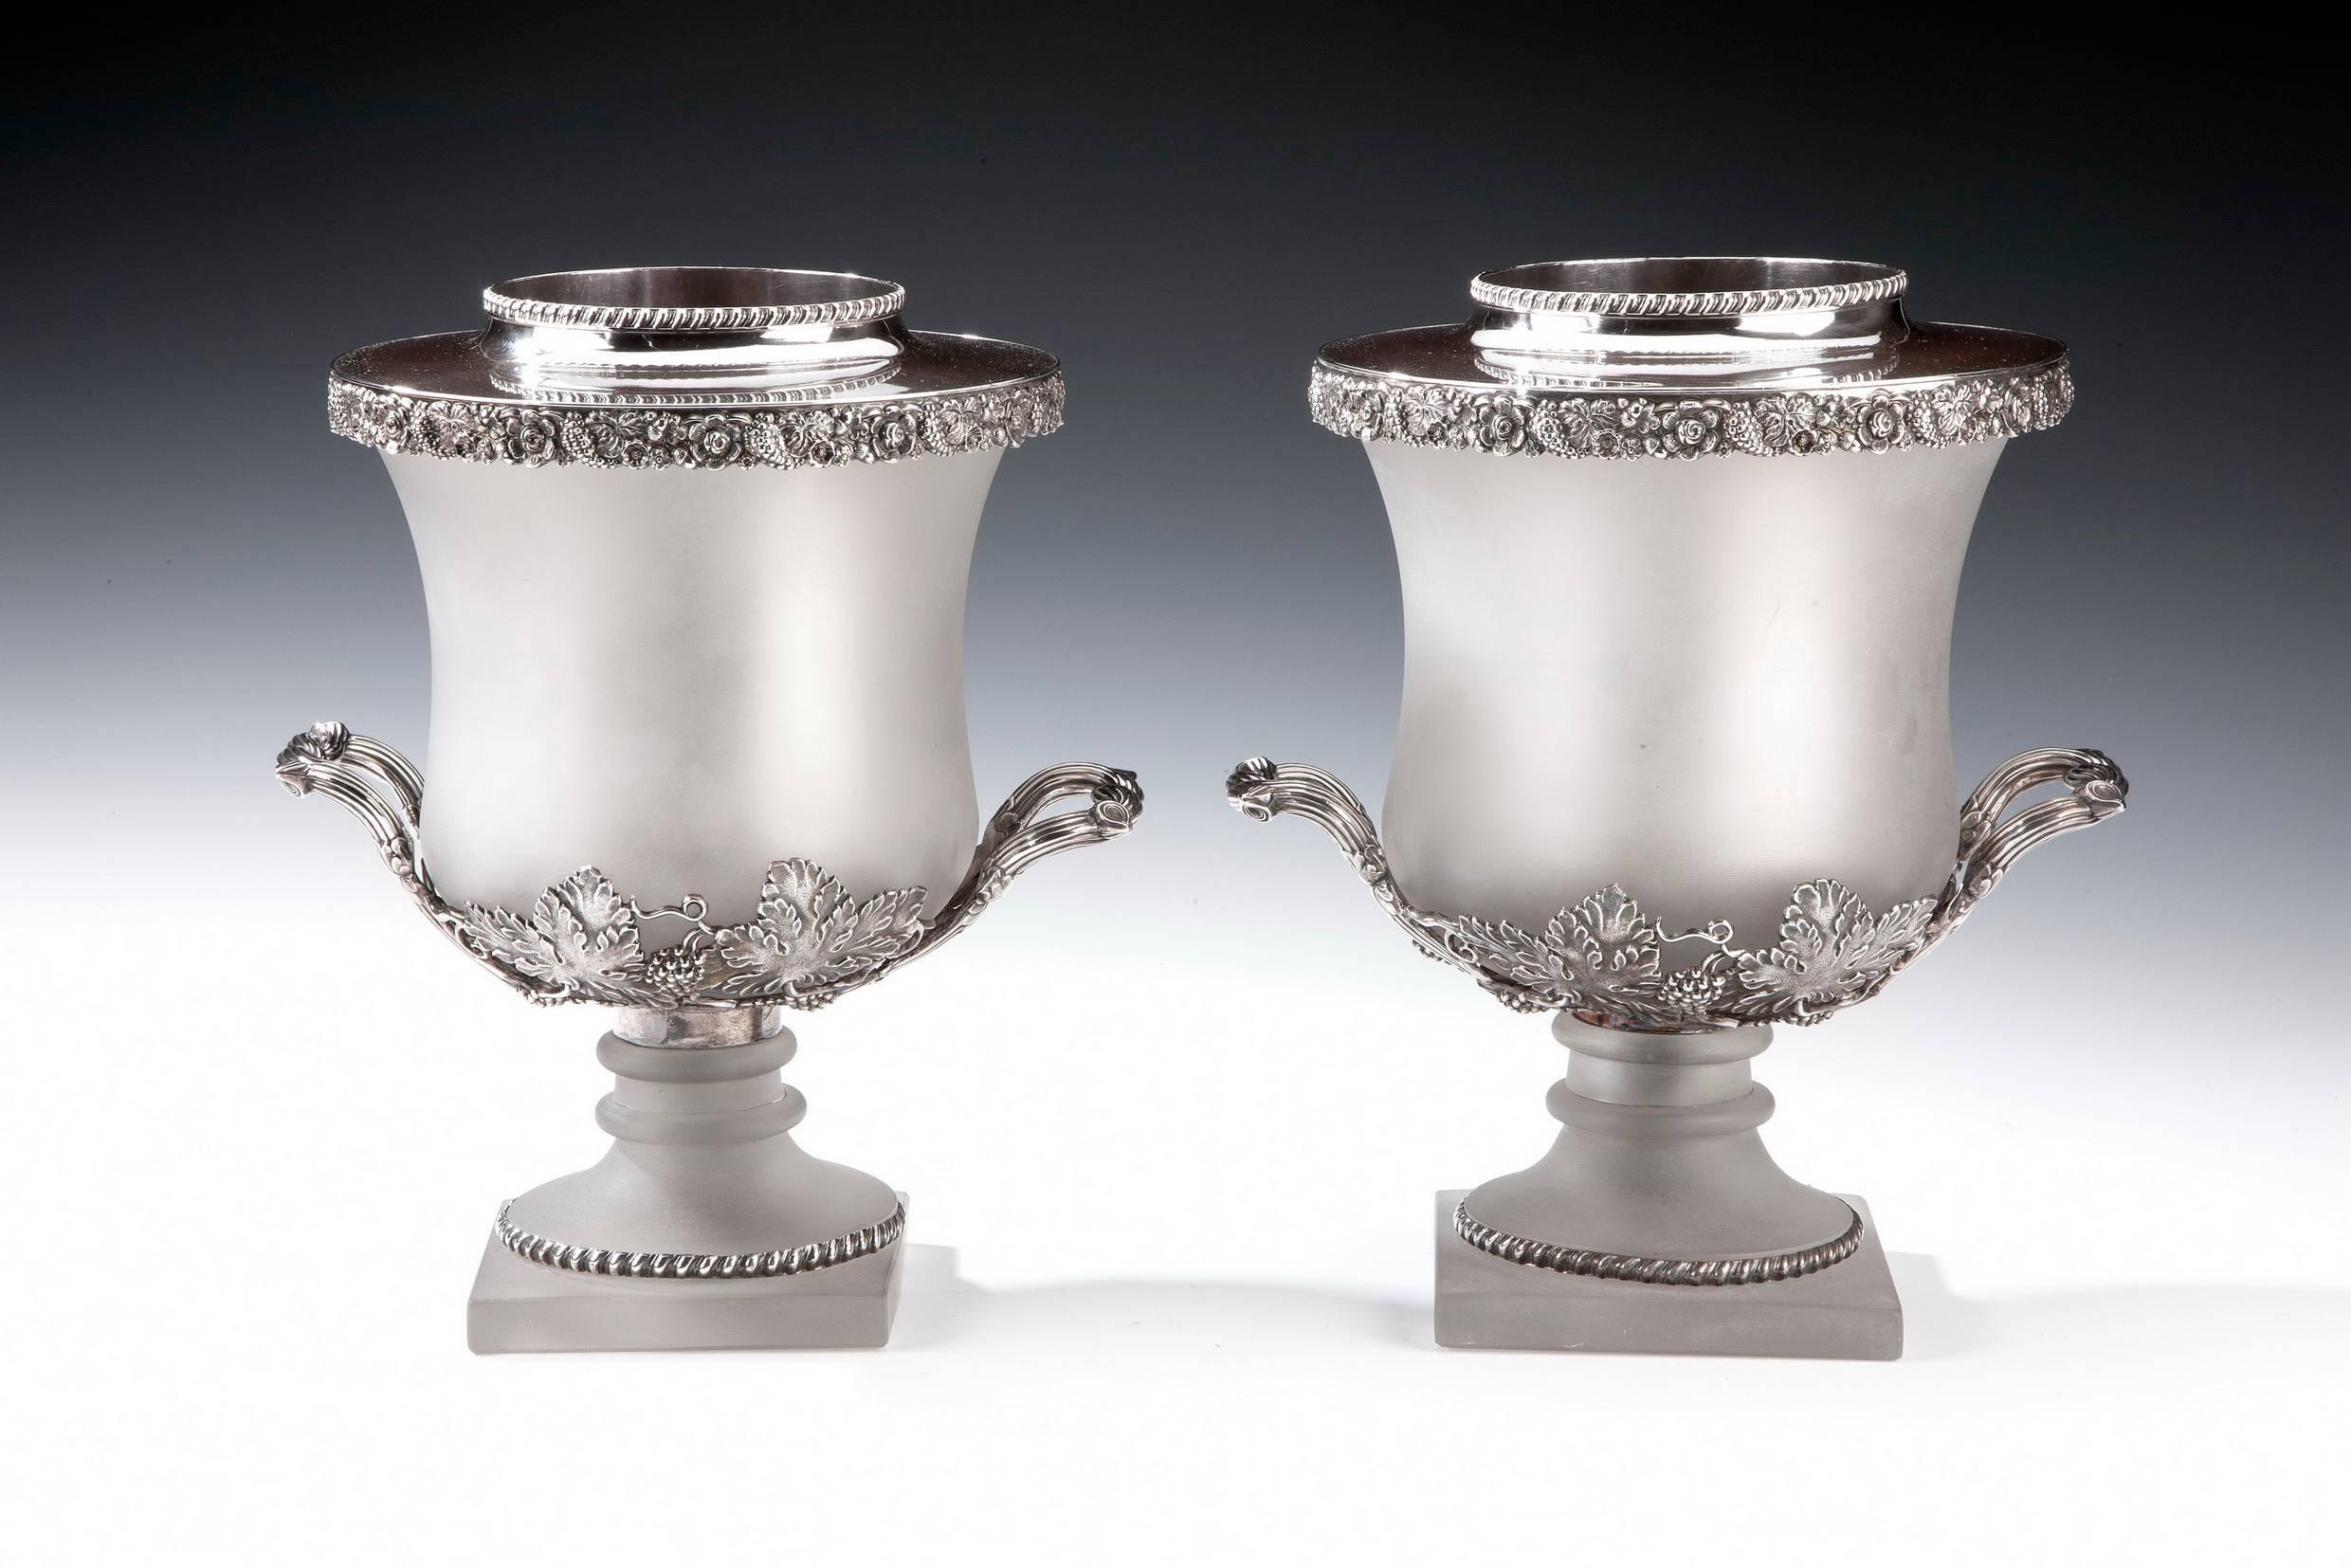 An unusual pair of frosted glass wine coolers, attributed to Collis & Co each of these unusual wine coolers comprises a shaped cylindrical glass body and pedestal foot set with silver plated mounts. The decoration consists of chased and repousse